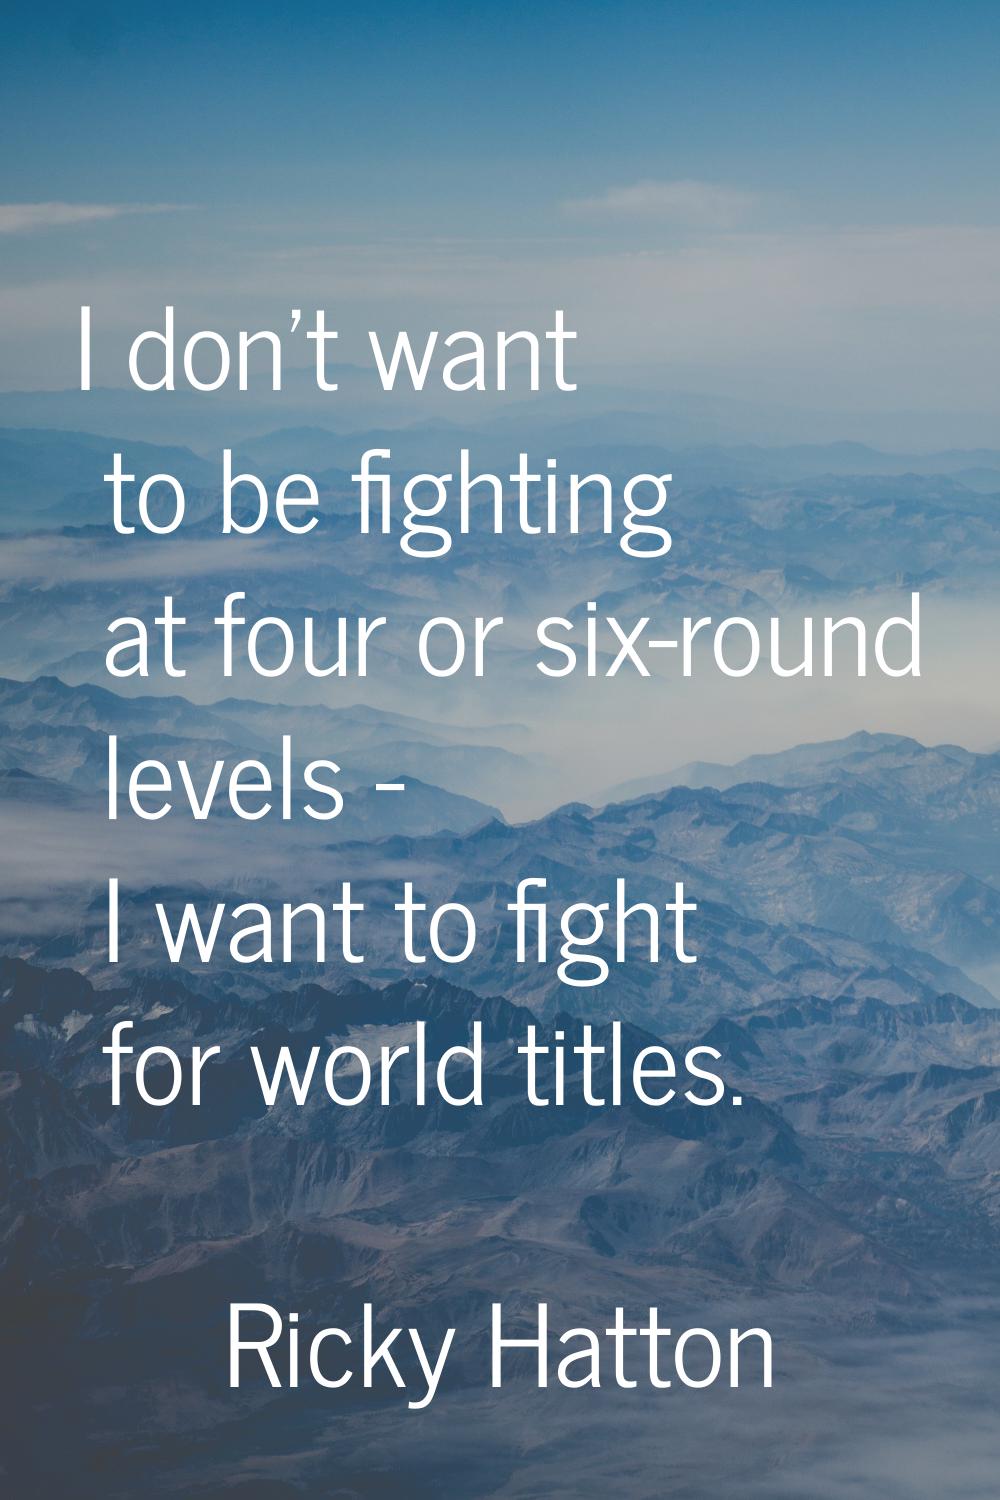 I don't want to be fighting at four or six-round levels - I want to fight for world titles.